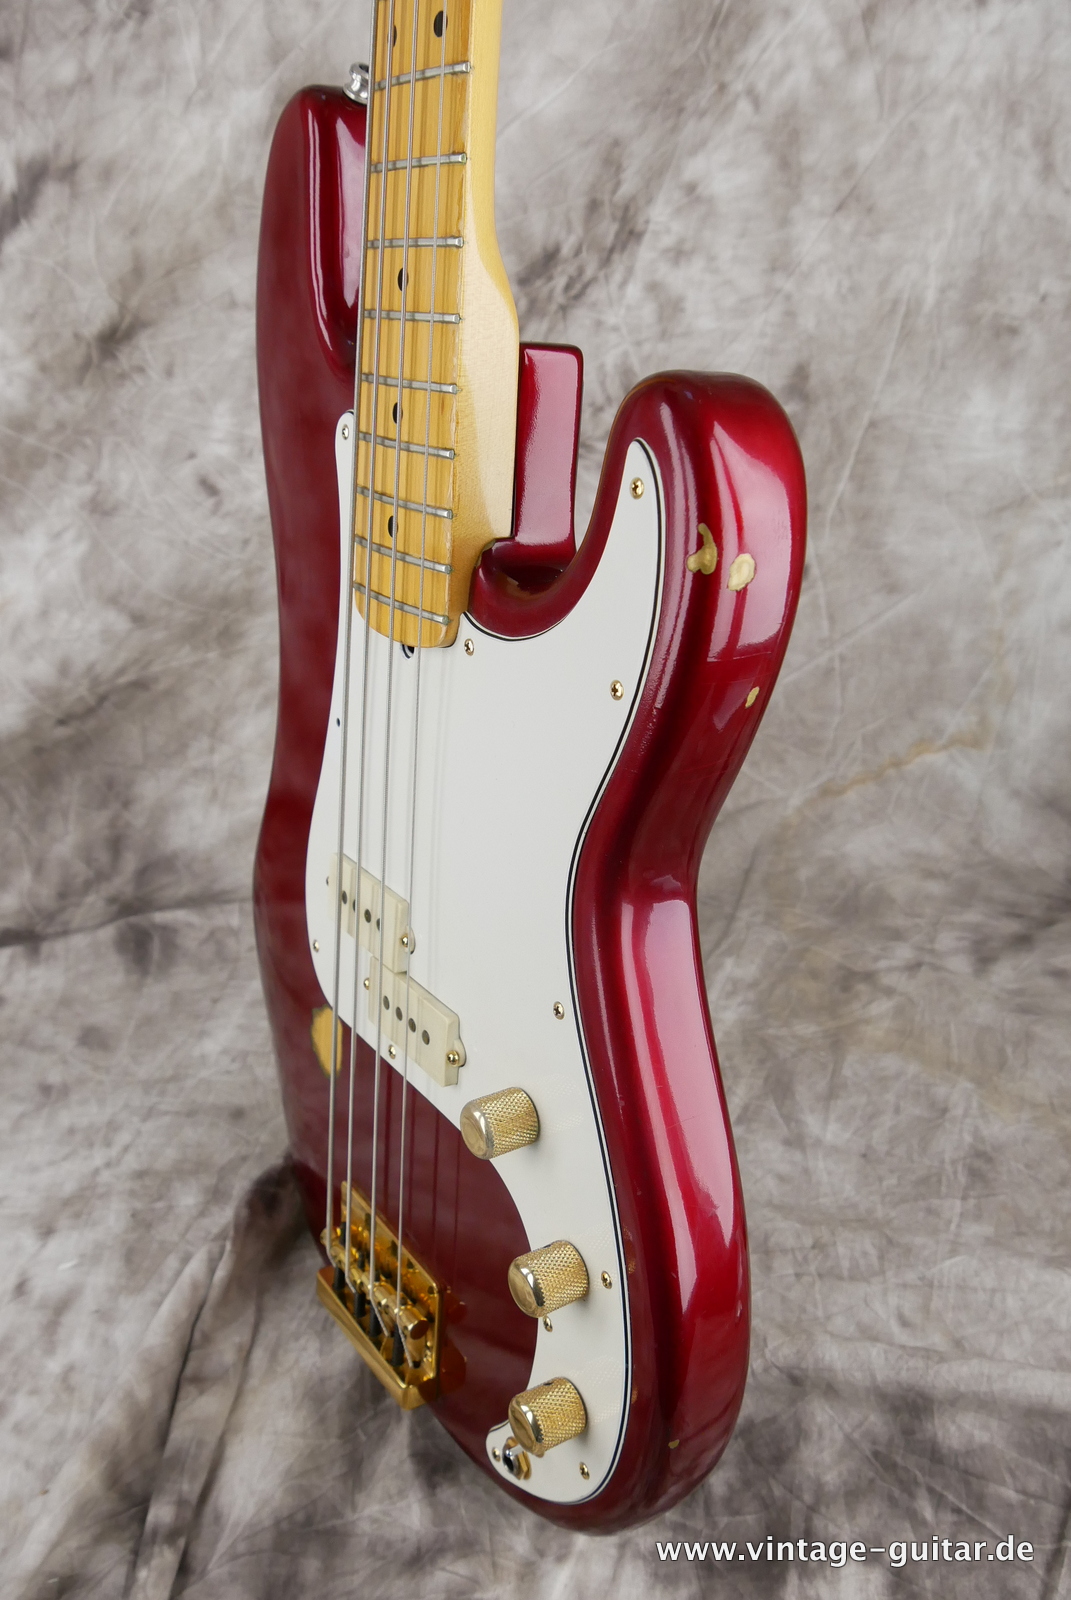 Fender_Precision_Special_USA_candy_apple_red_1982-006.JPG